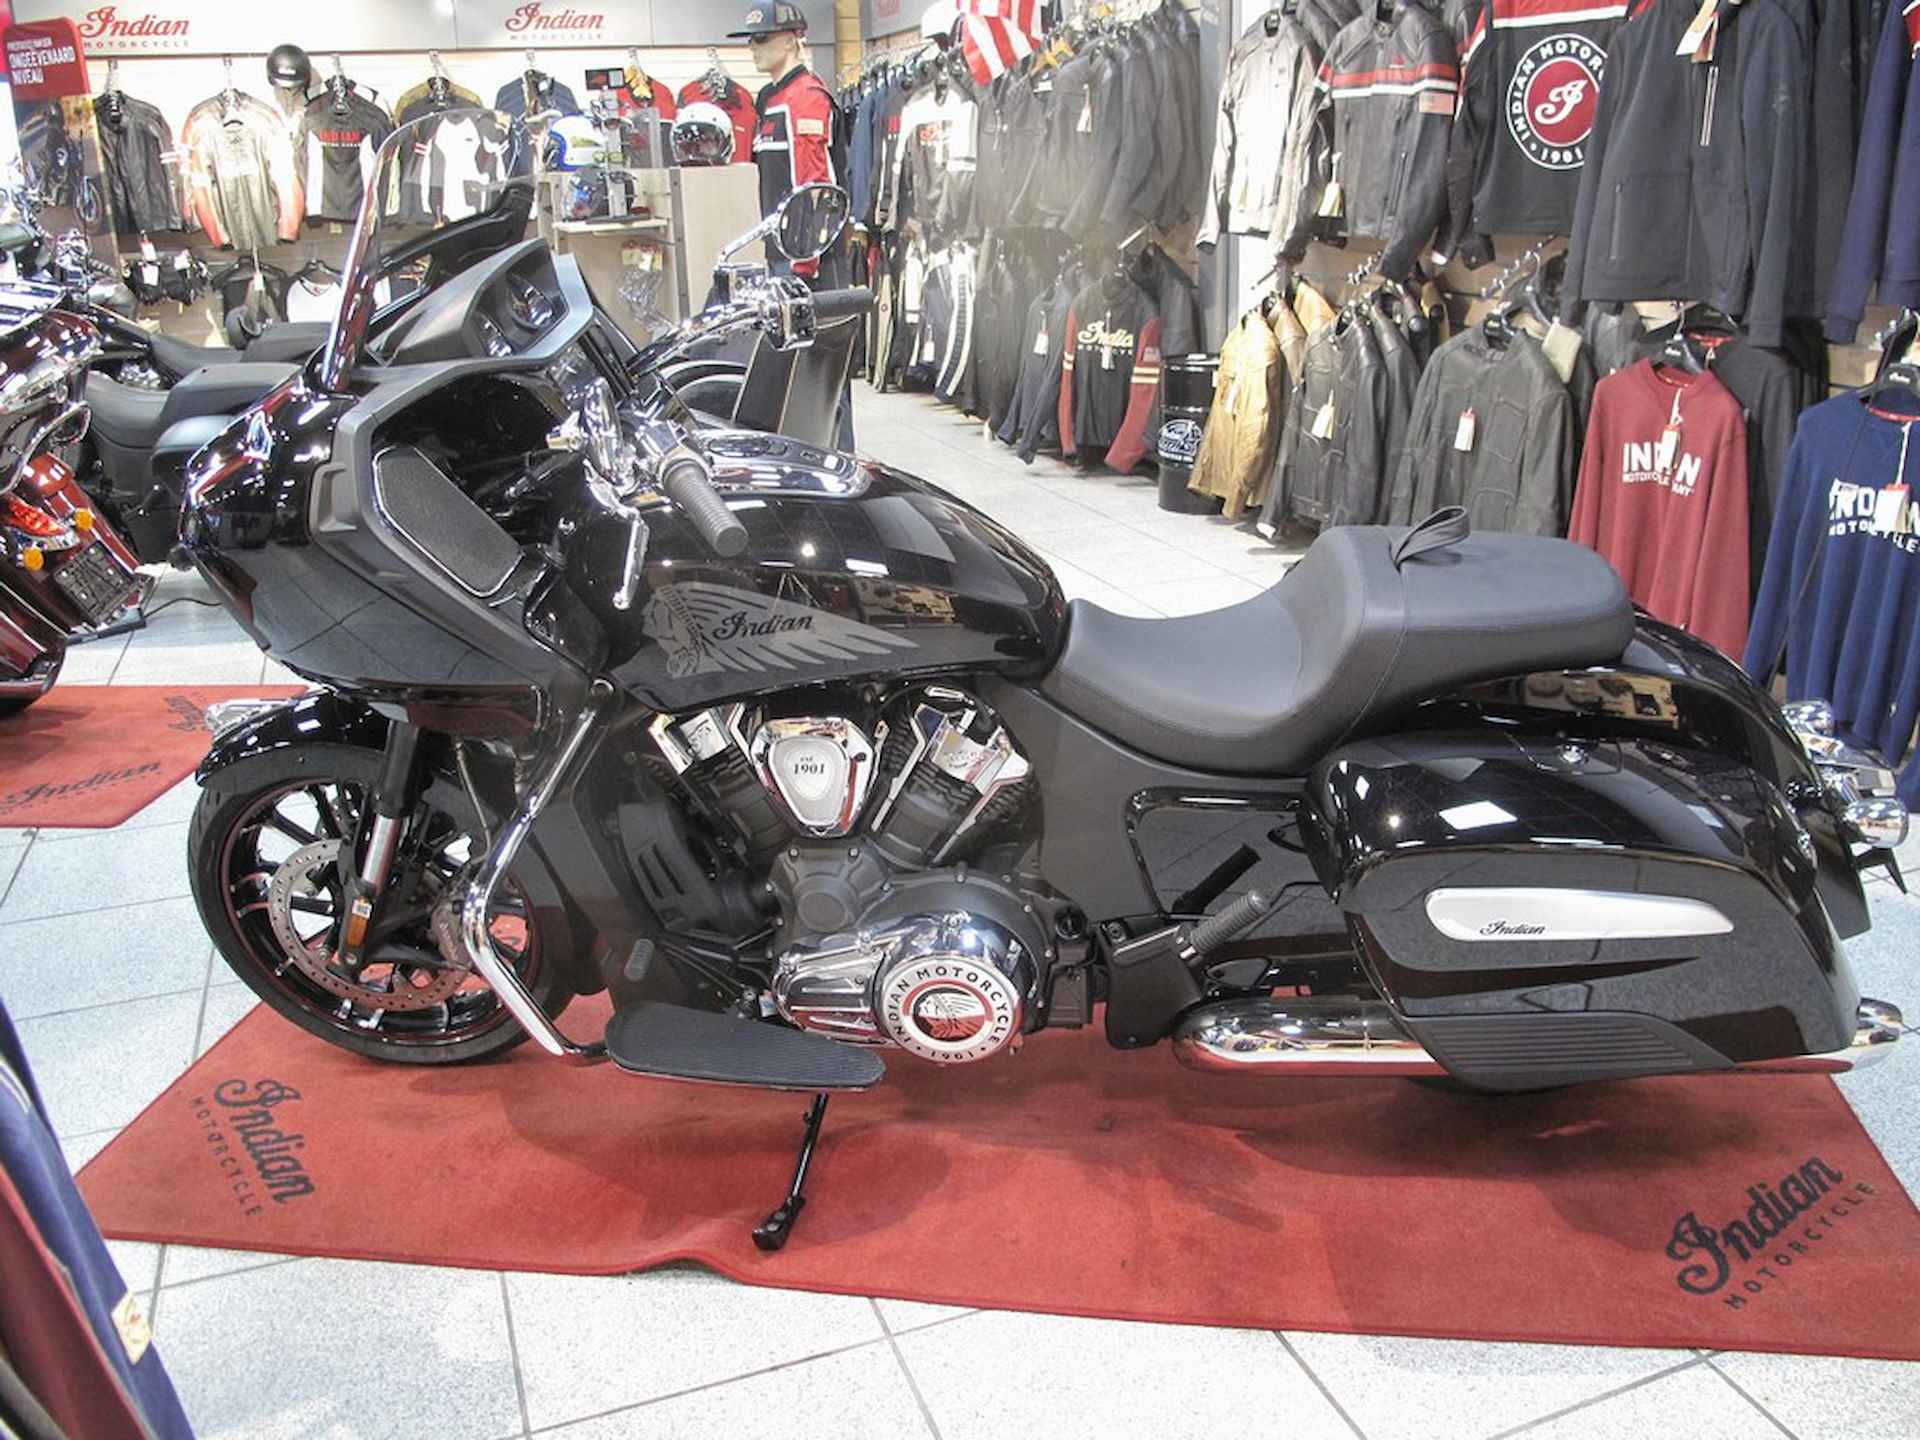 Indian Challenger Limited Official Indian Motorcycle Dealer - 5/17